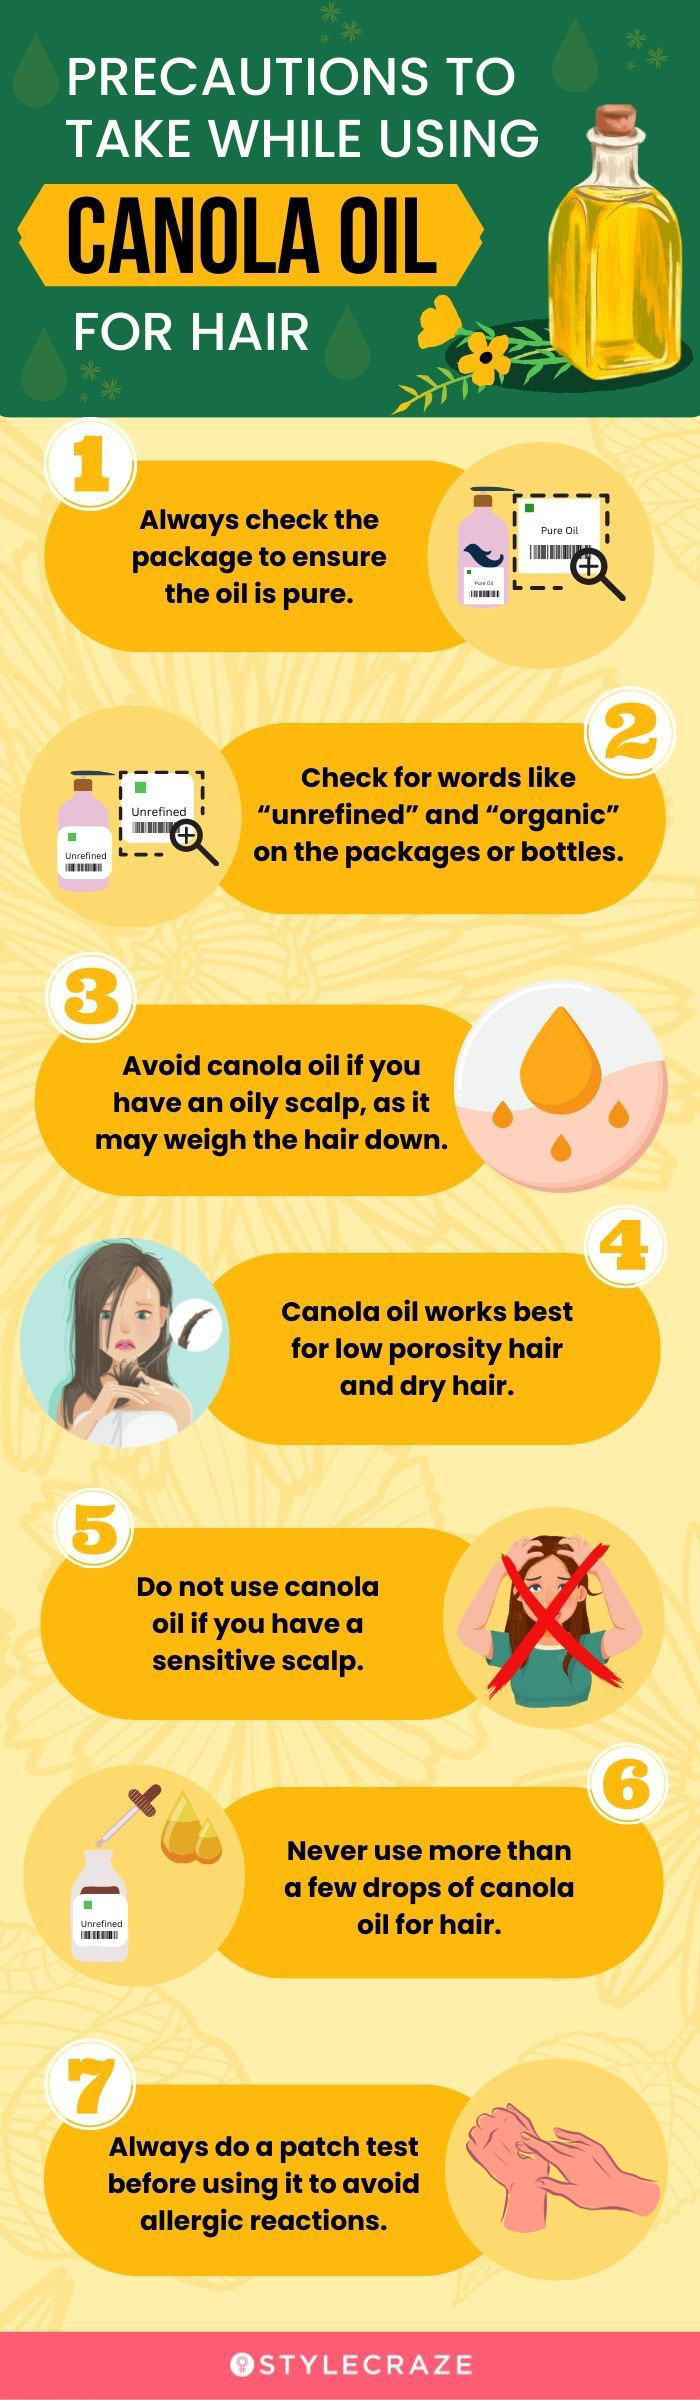 precautions to take when using canola oil for hair (infographic)